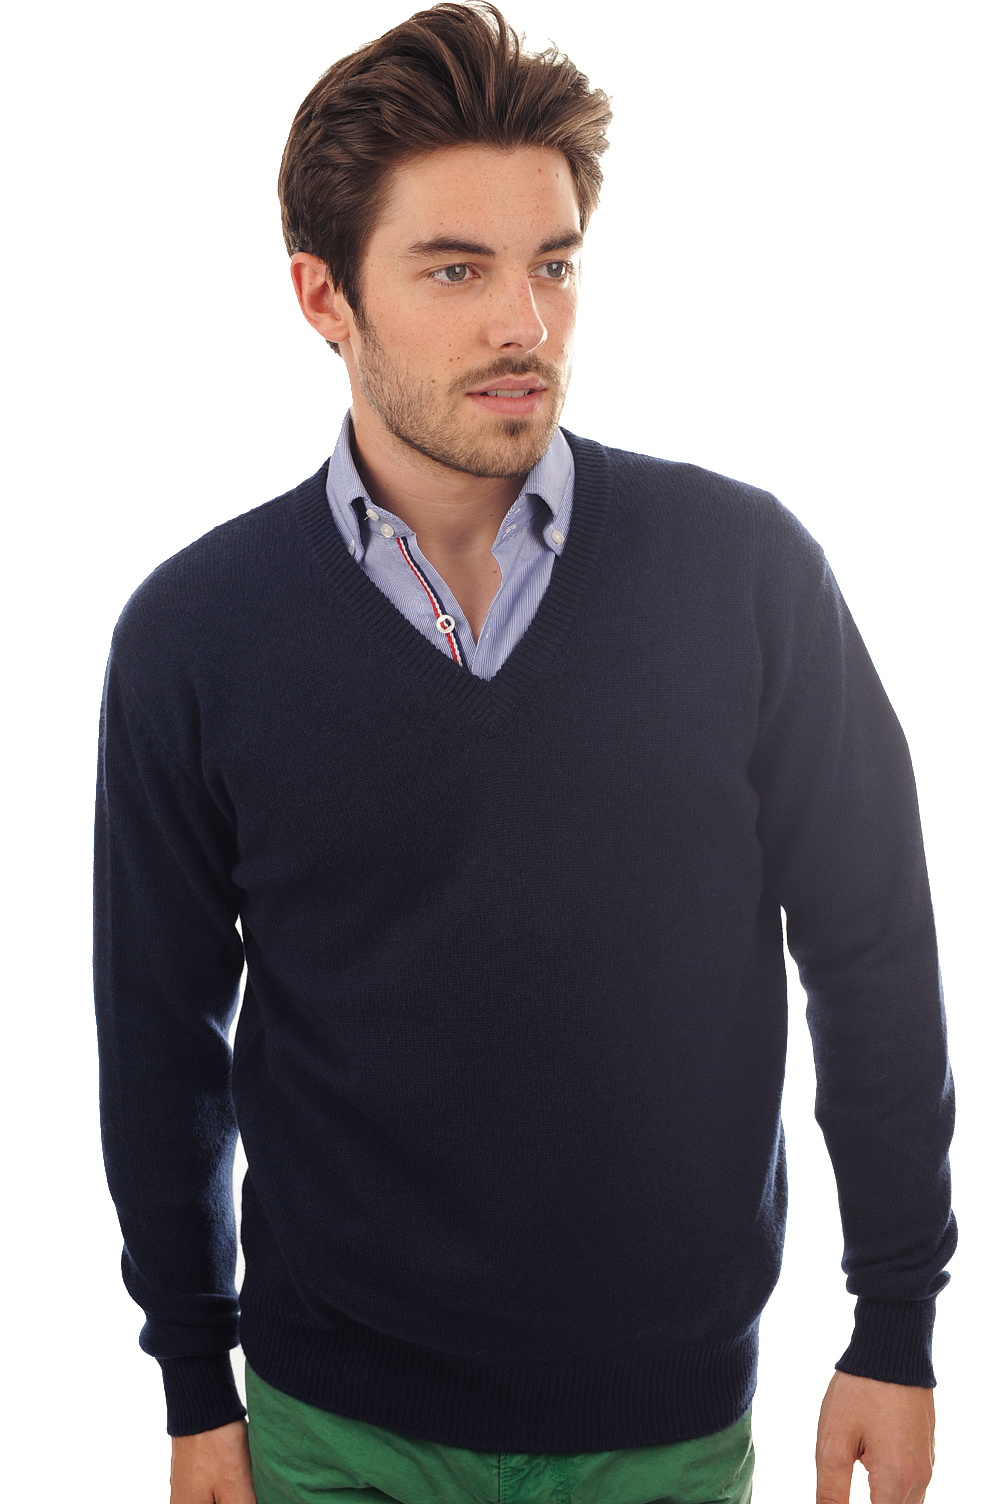 Cachemire pull homme hippolyte 4f marine fonce 3xl